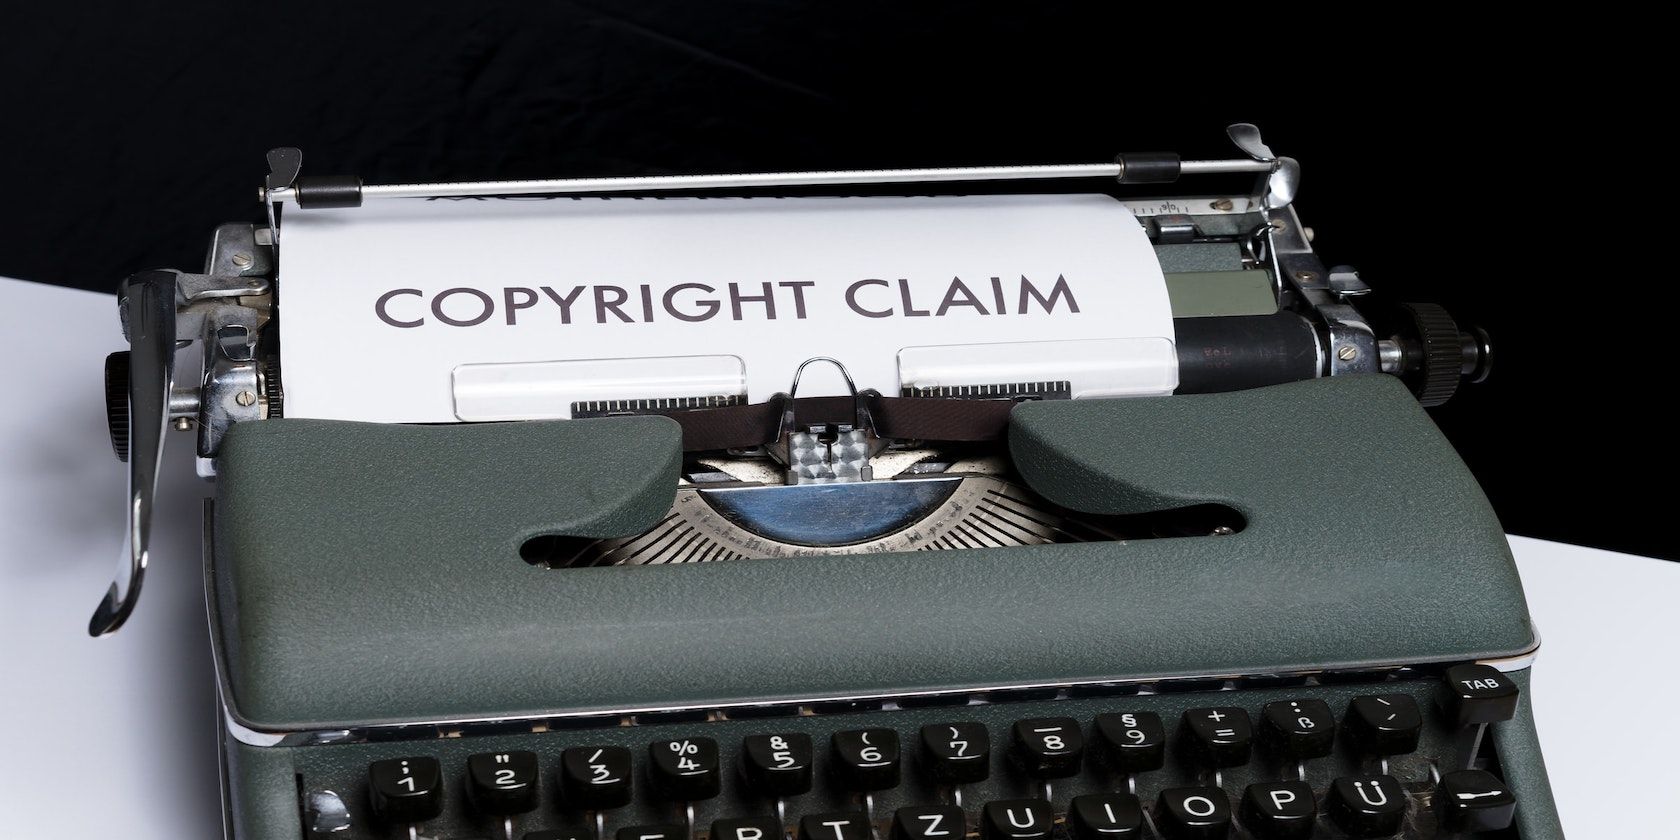 How to Determine Whether a Video Is Copyrighted